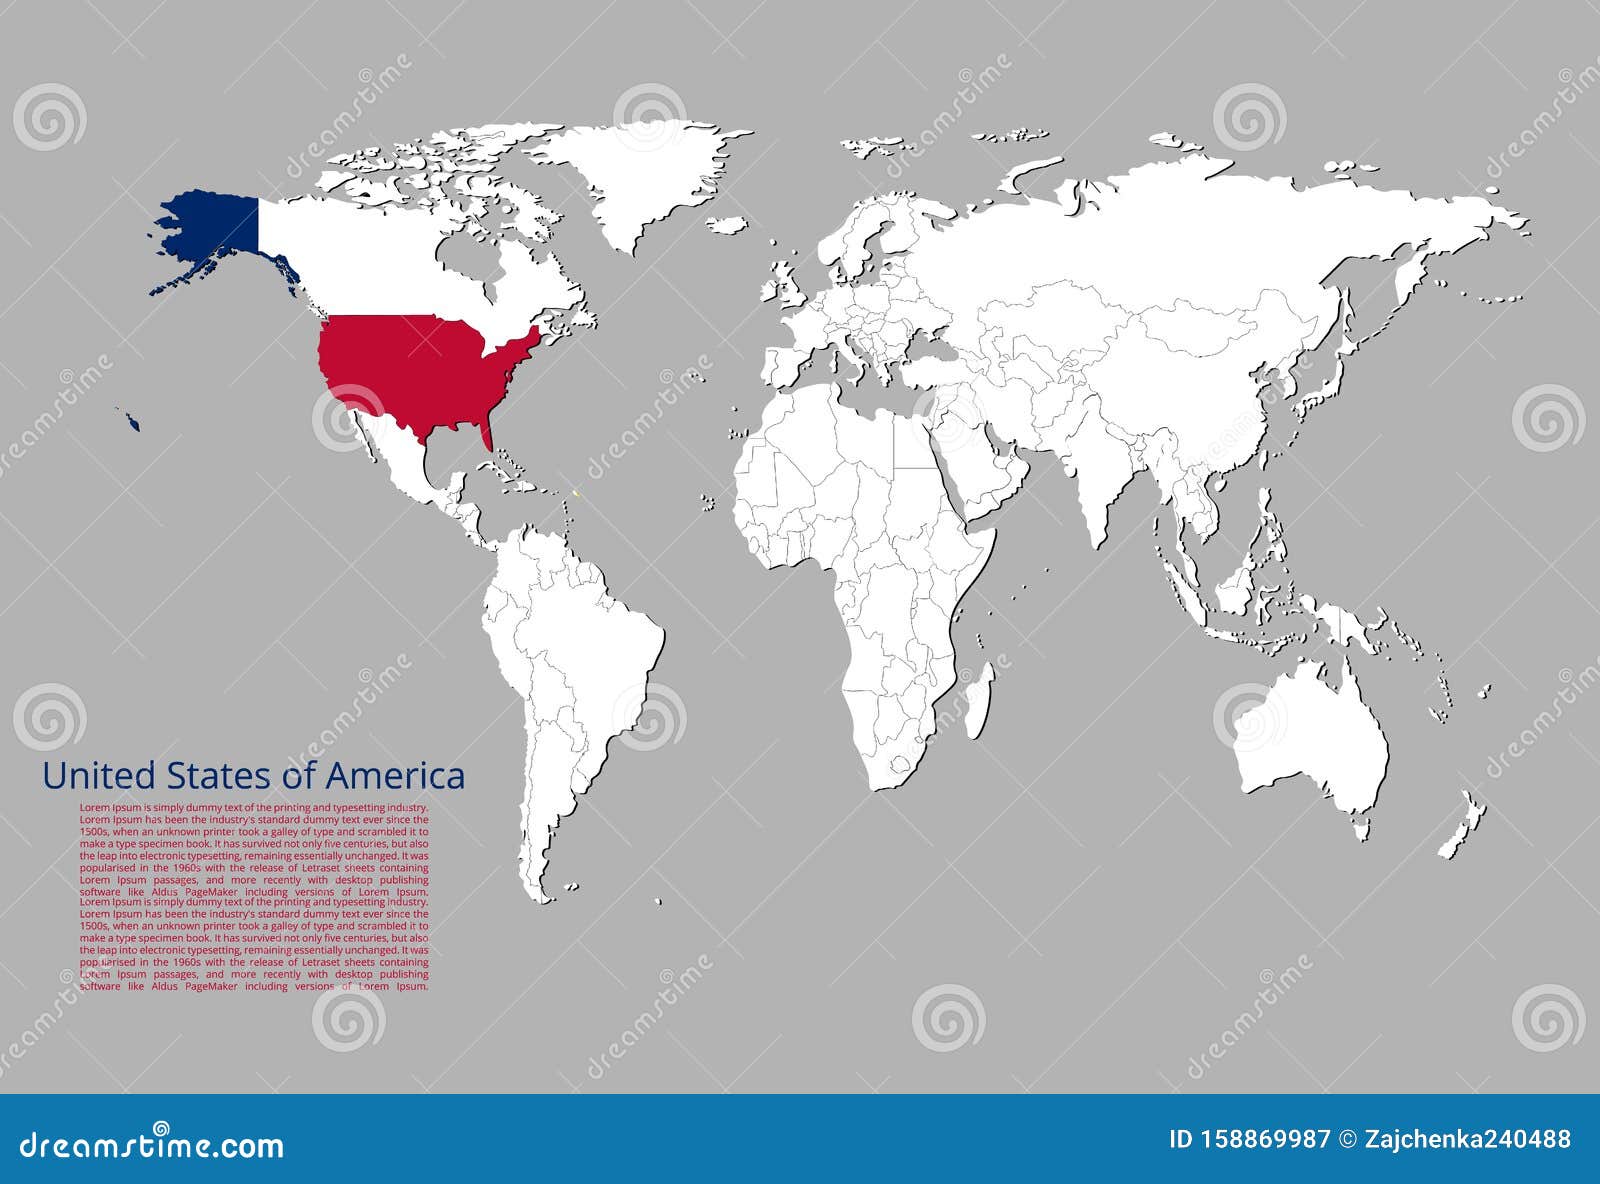 Map Of The United States Of America Highlighted In Blue And Red